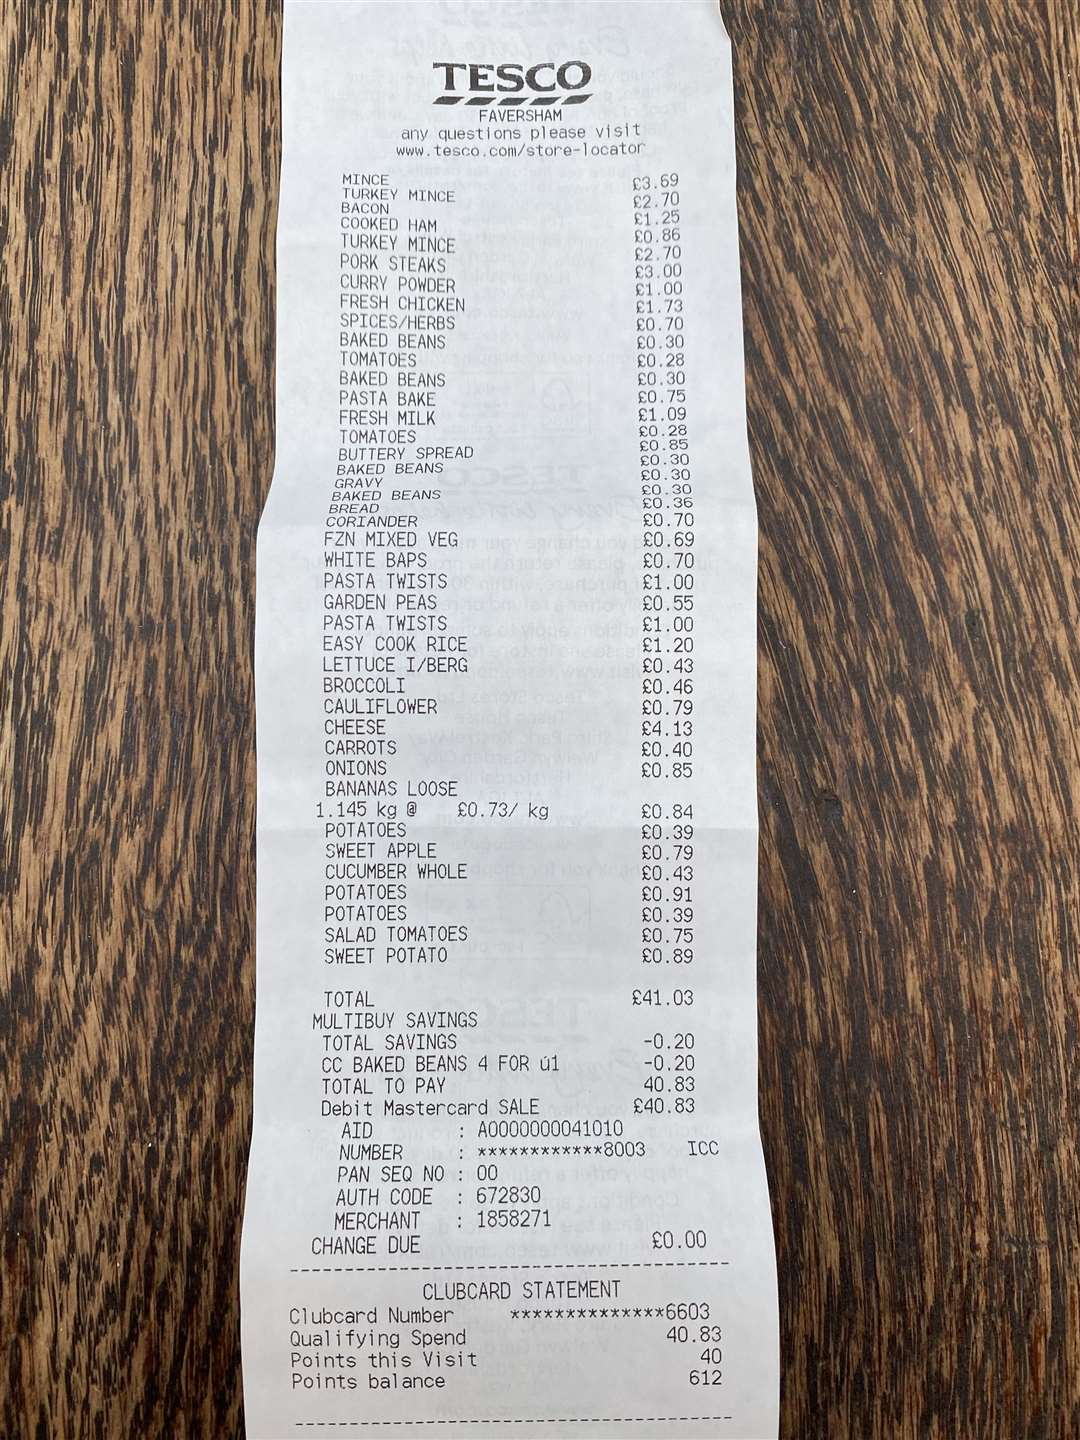 The receipt from my Tesco food shop